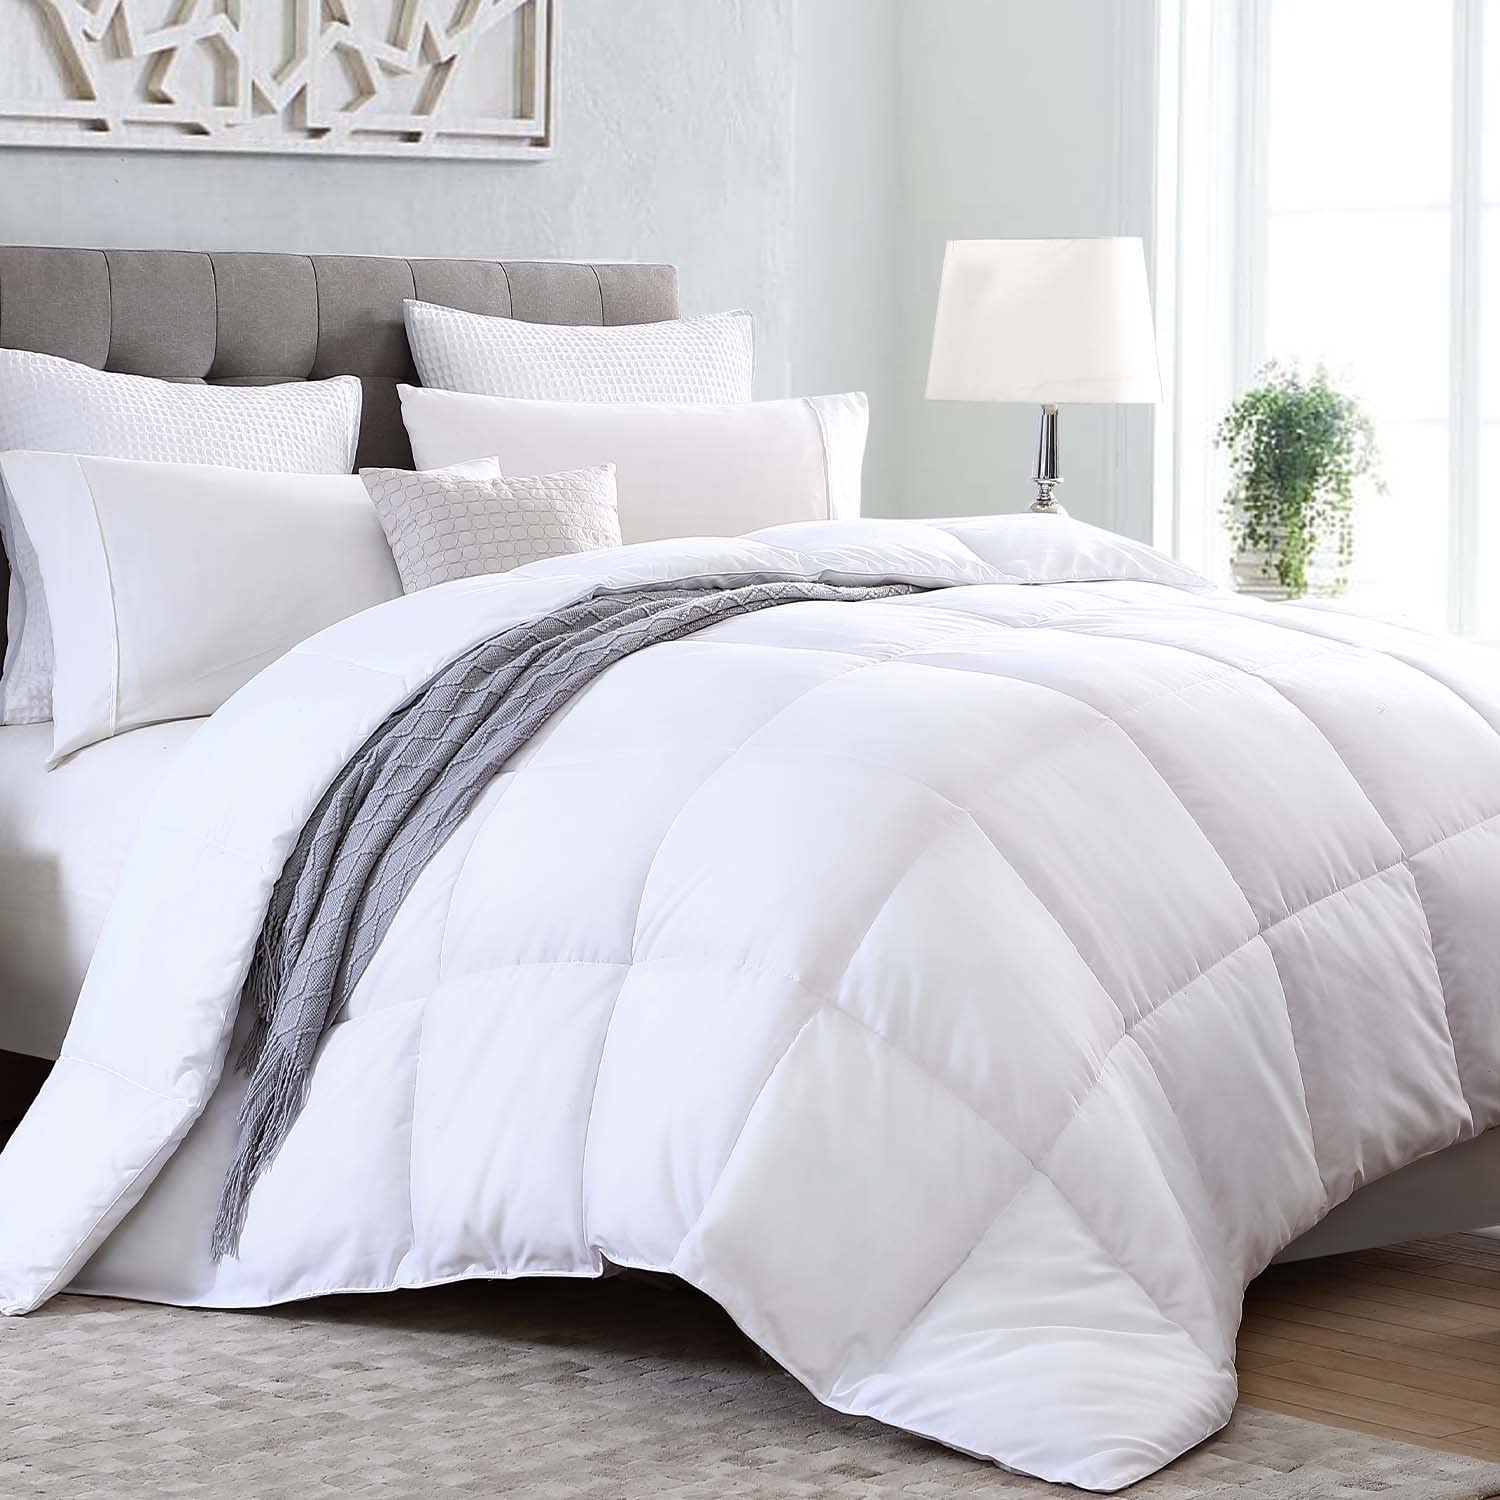 Book Cover Kingsley trend King Comforter Duvet Insert - All Season Quilted Ultra Soft Breathable Down Alternative, Box Stitch White Comforter with Corner Tabs, 104x92 King White